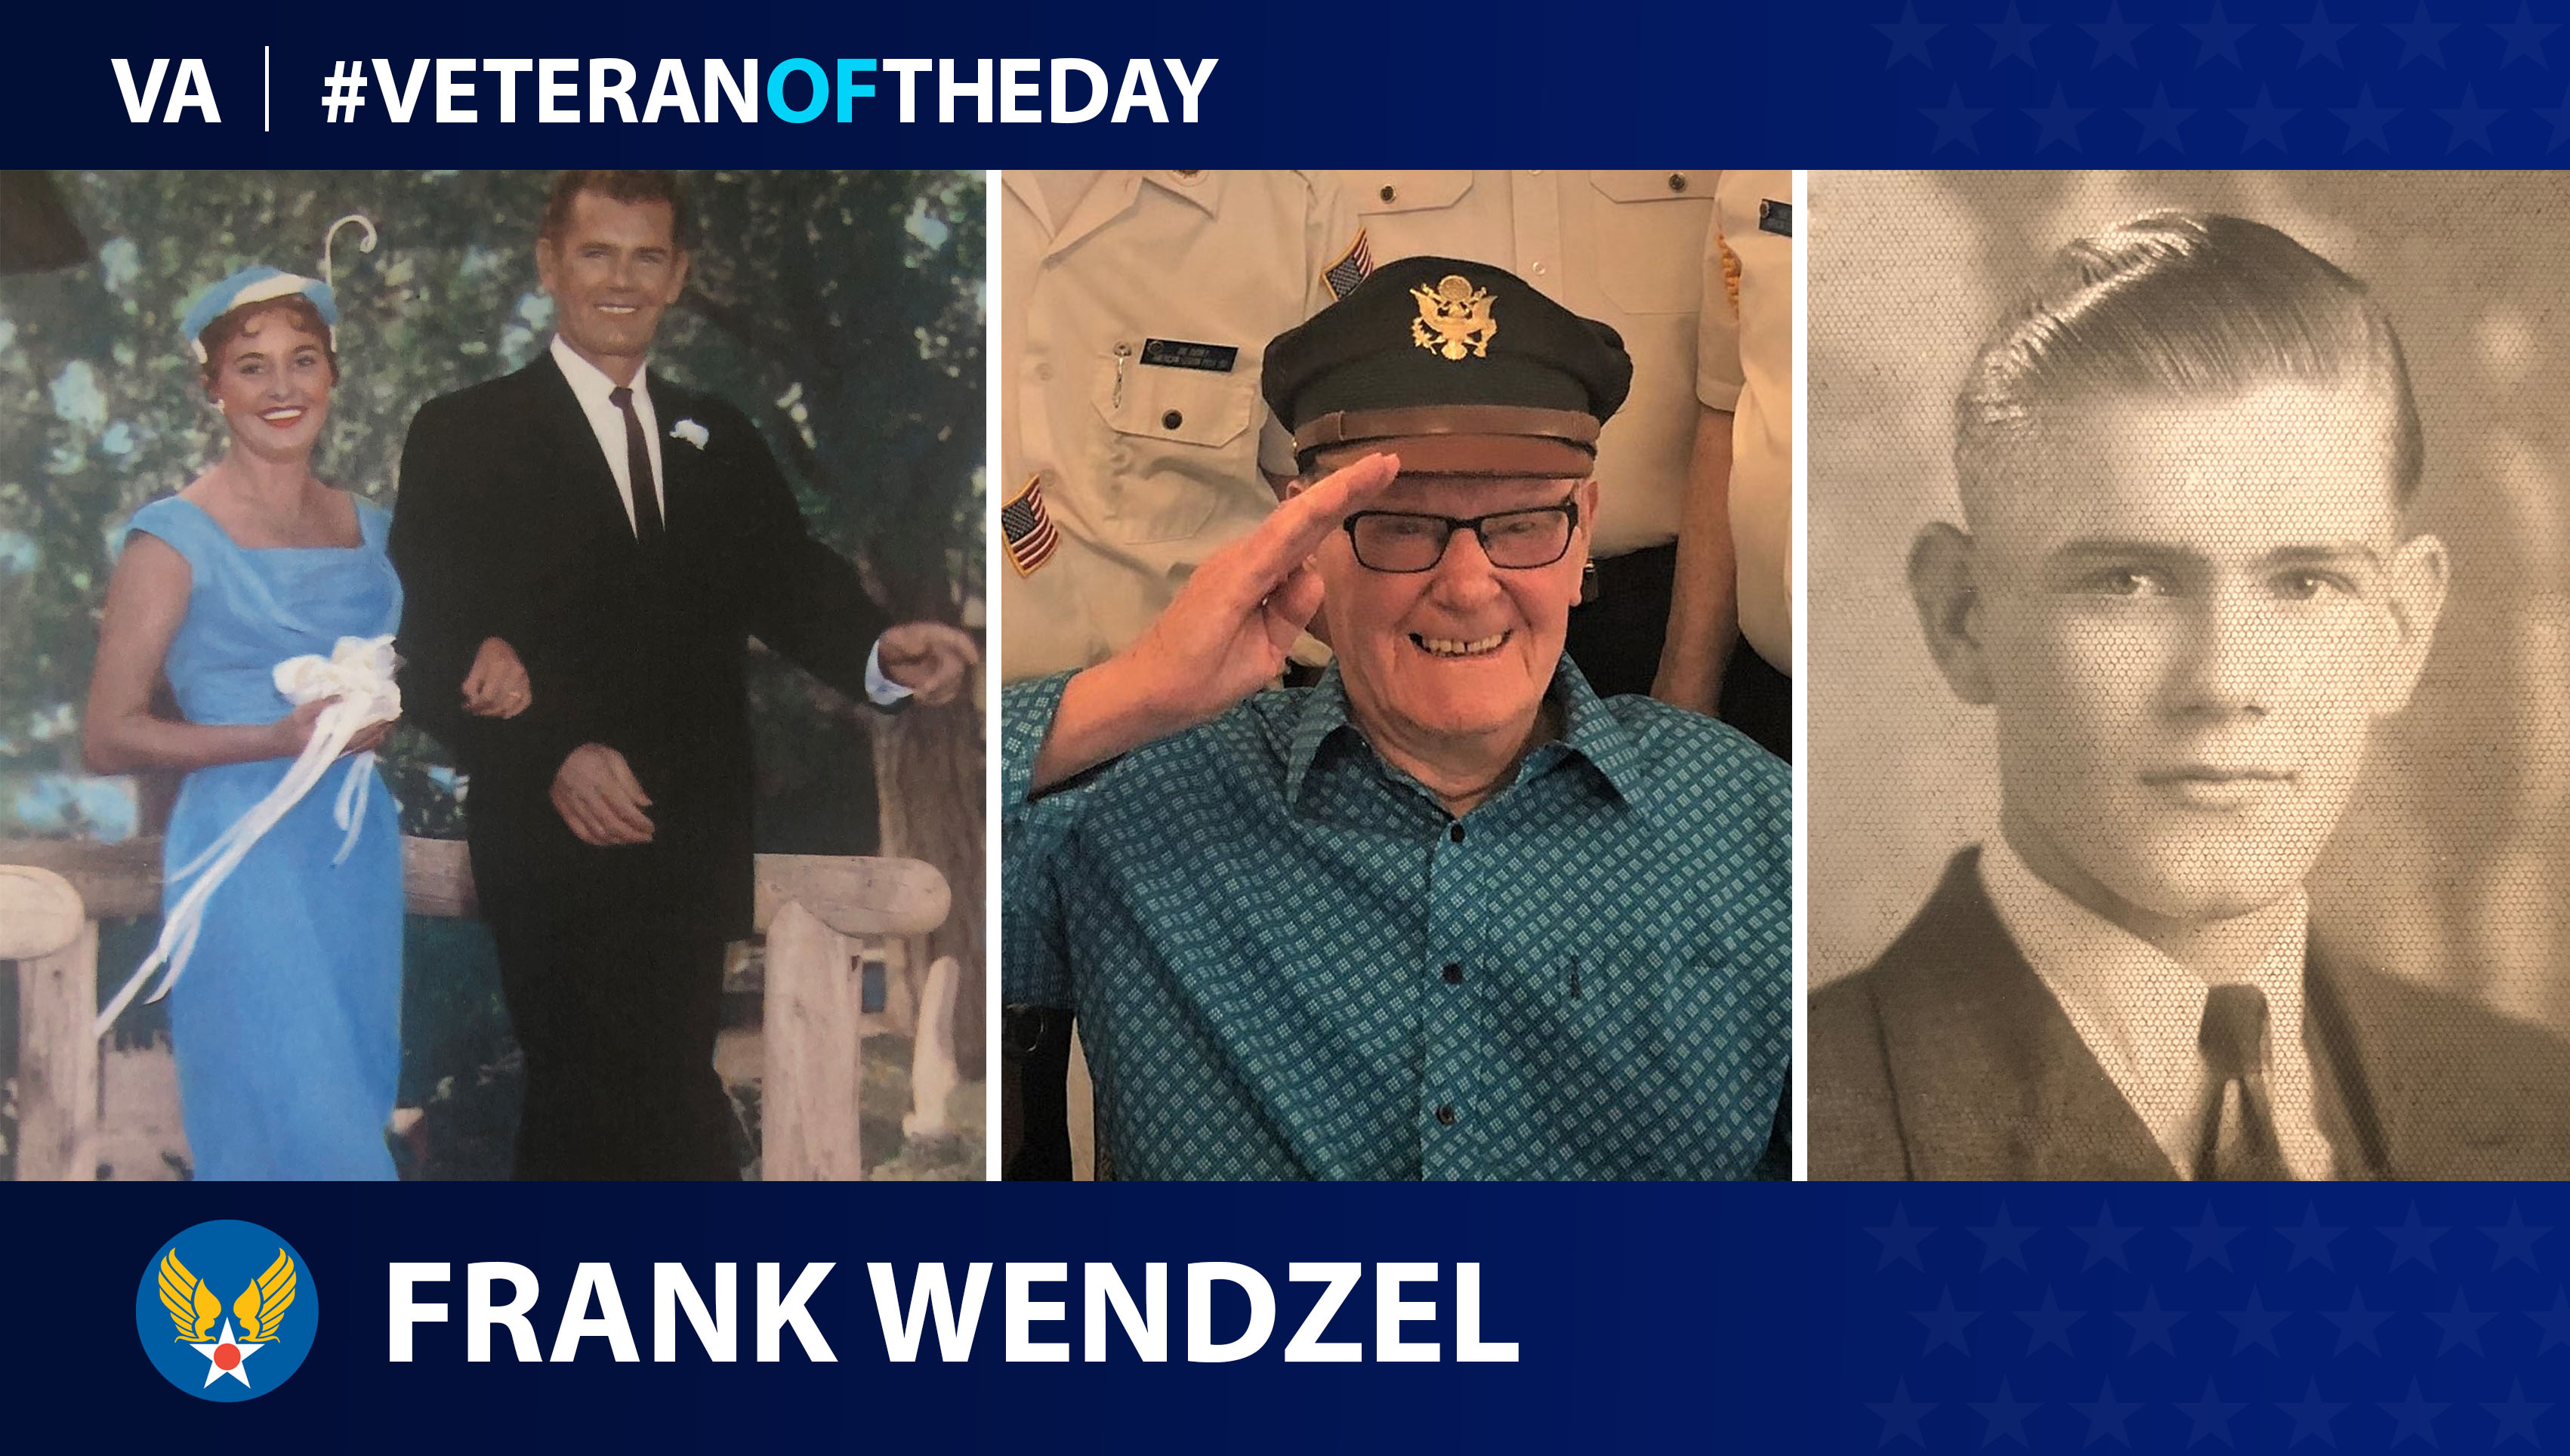 Army Air Forces Veteran Frank Wendzel is today's Veteran of the Day.